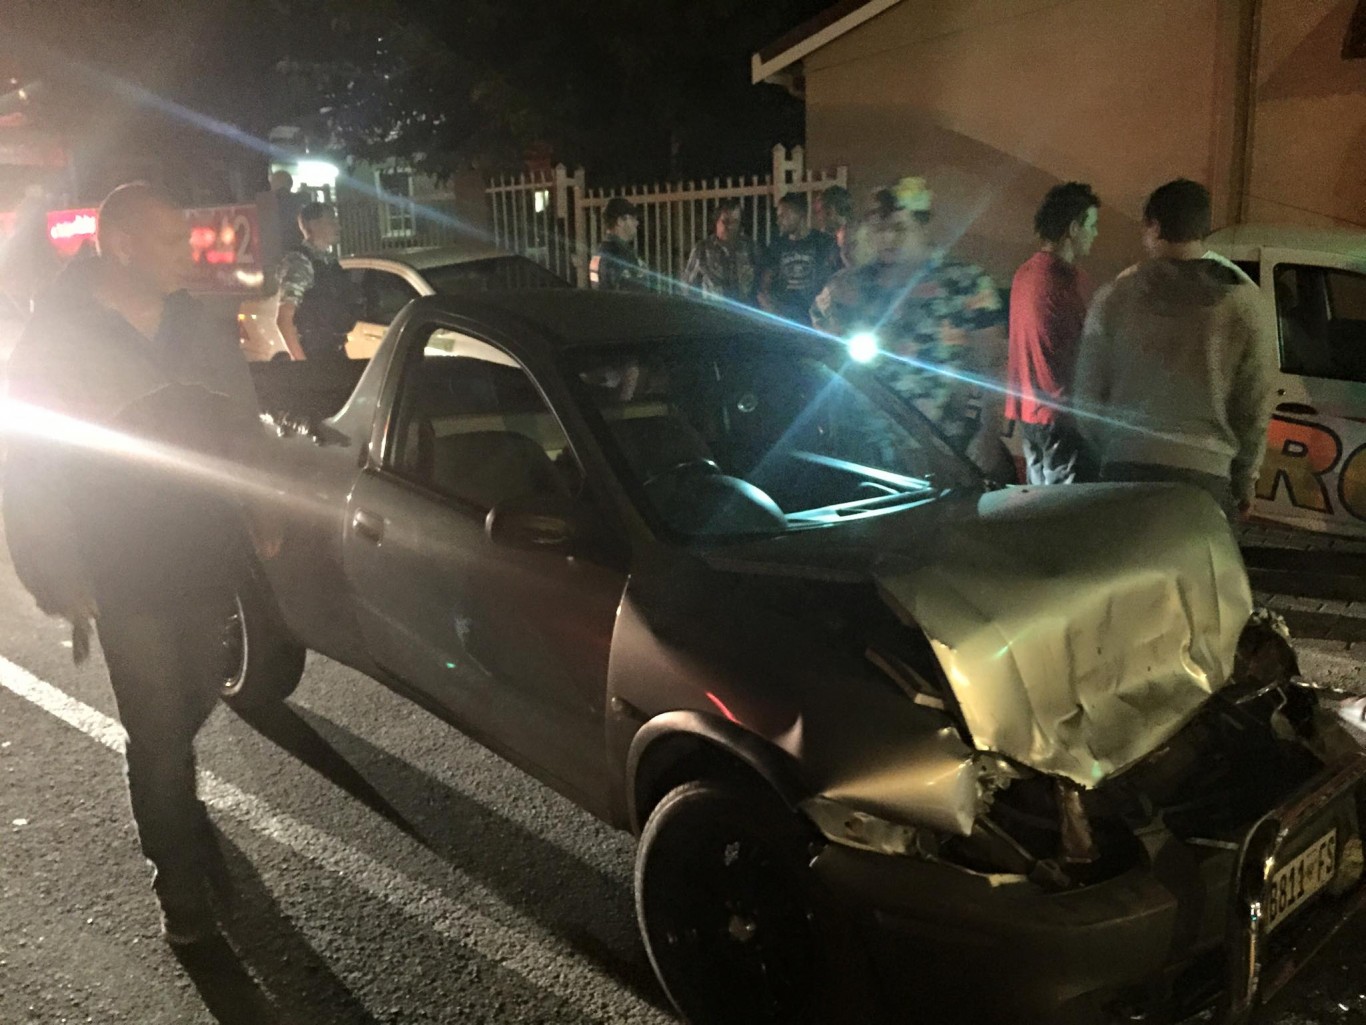 Fortunate escape from injury after rear-end collision in Bloemfontein